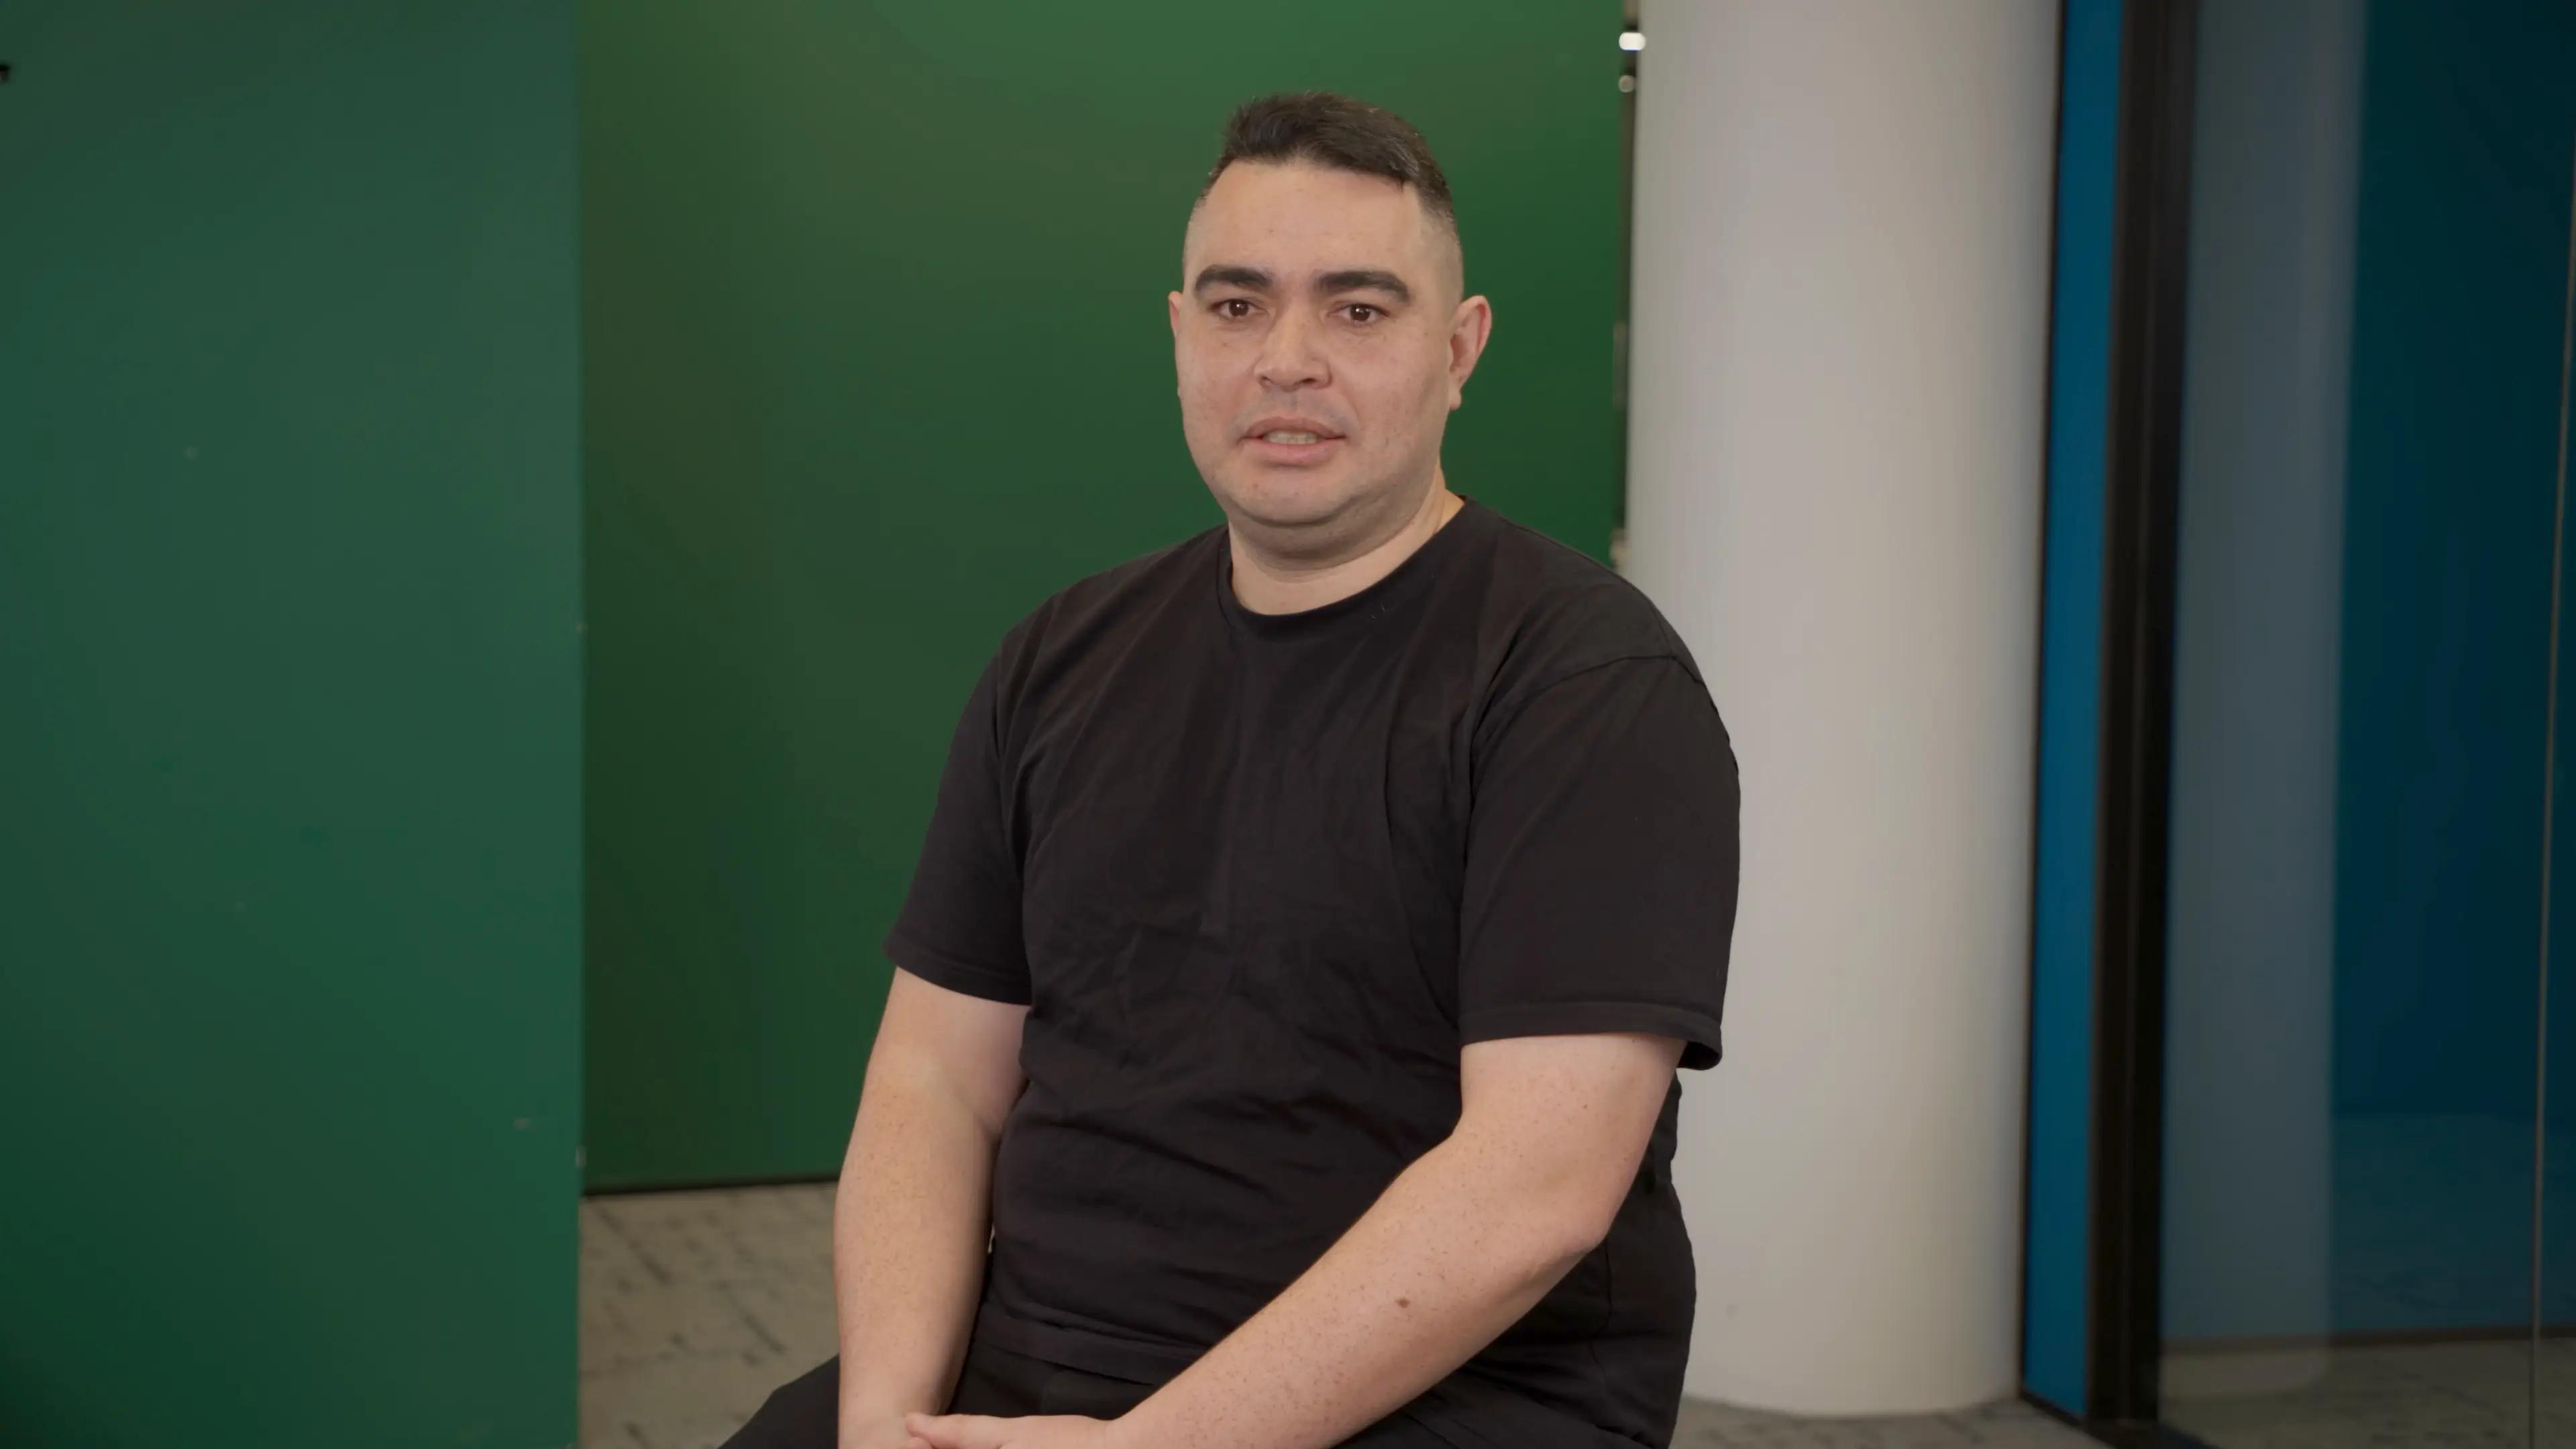 Joe Osborn seated against a plain green backdrop, dressed in a black t-shirt for his academyEX testimonial video.